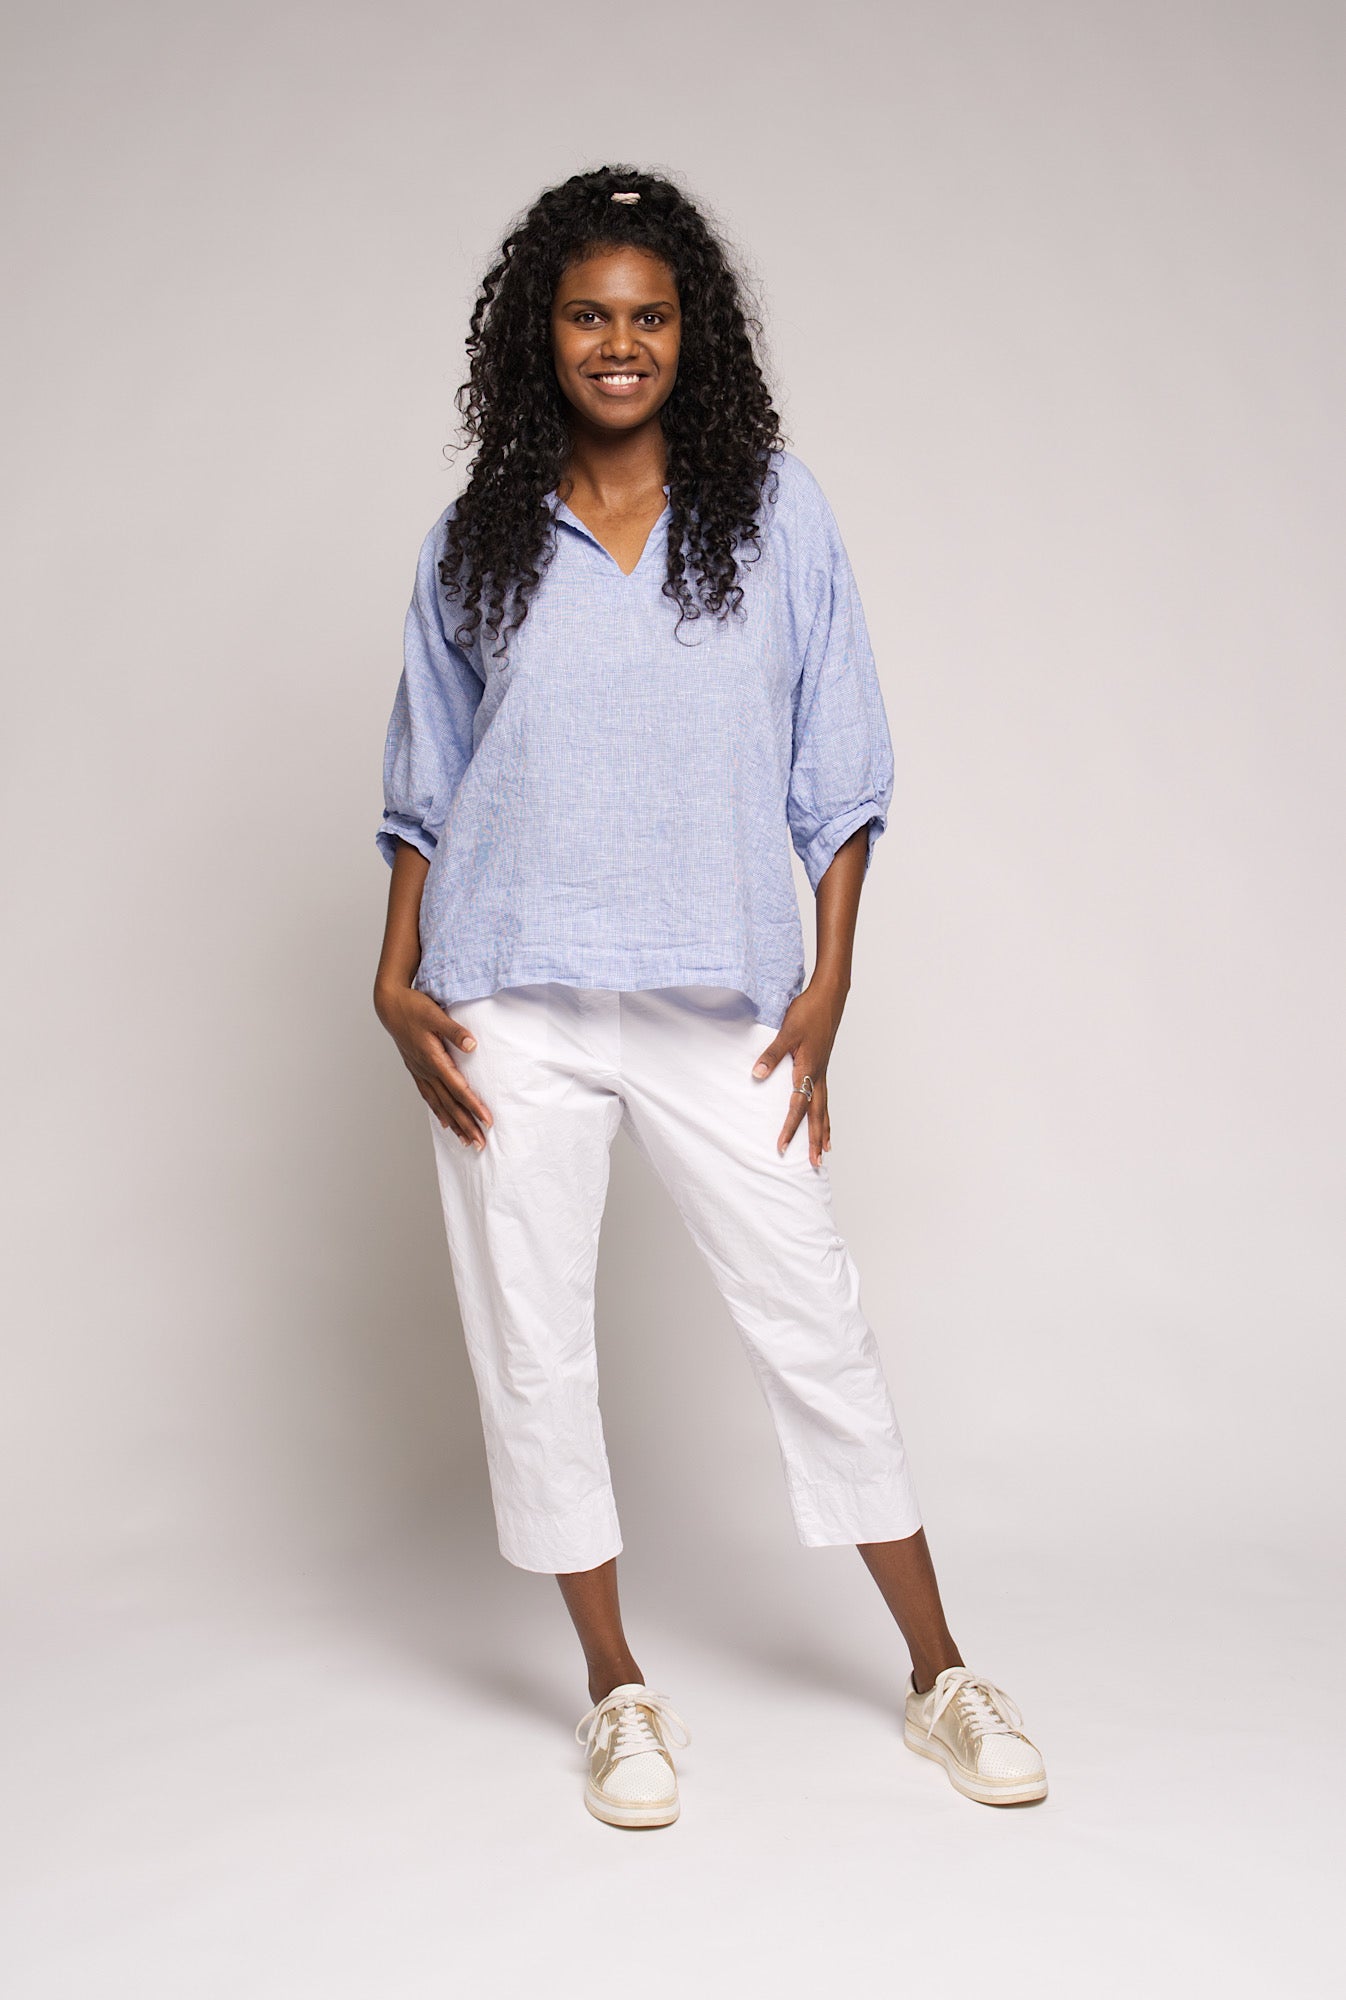 Juno Linen Top - Blue check; 100% linen top made in Australia by MUSE ...